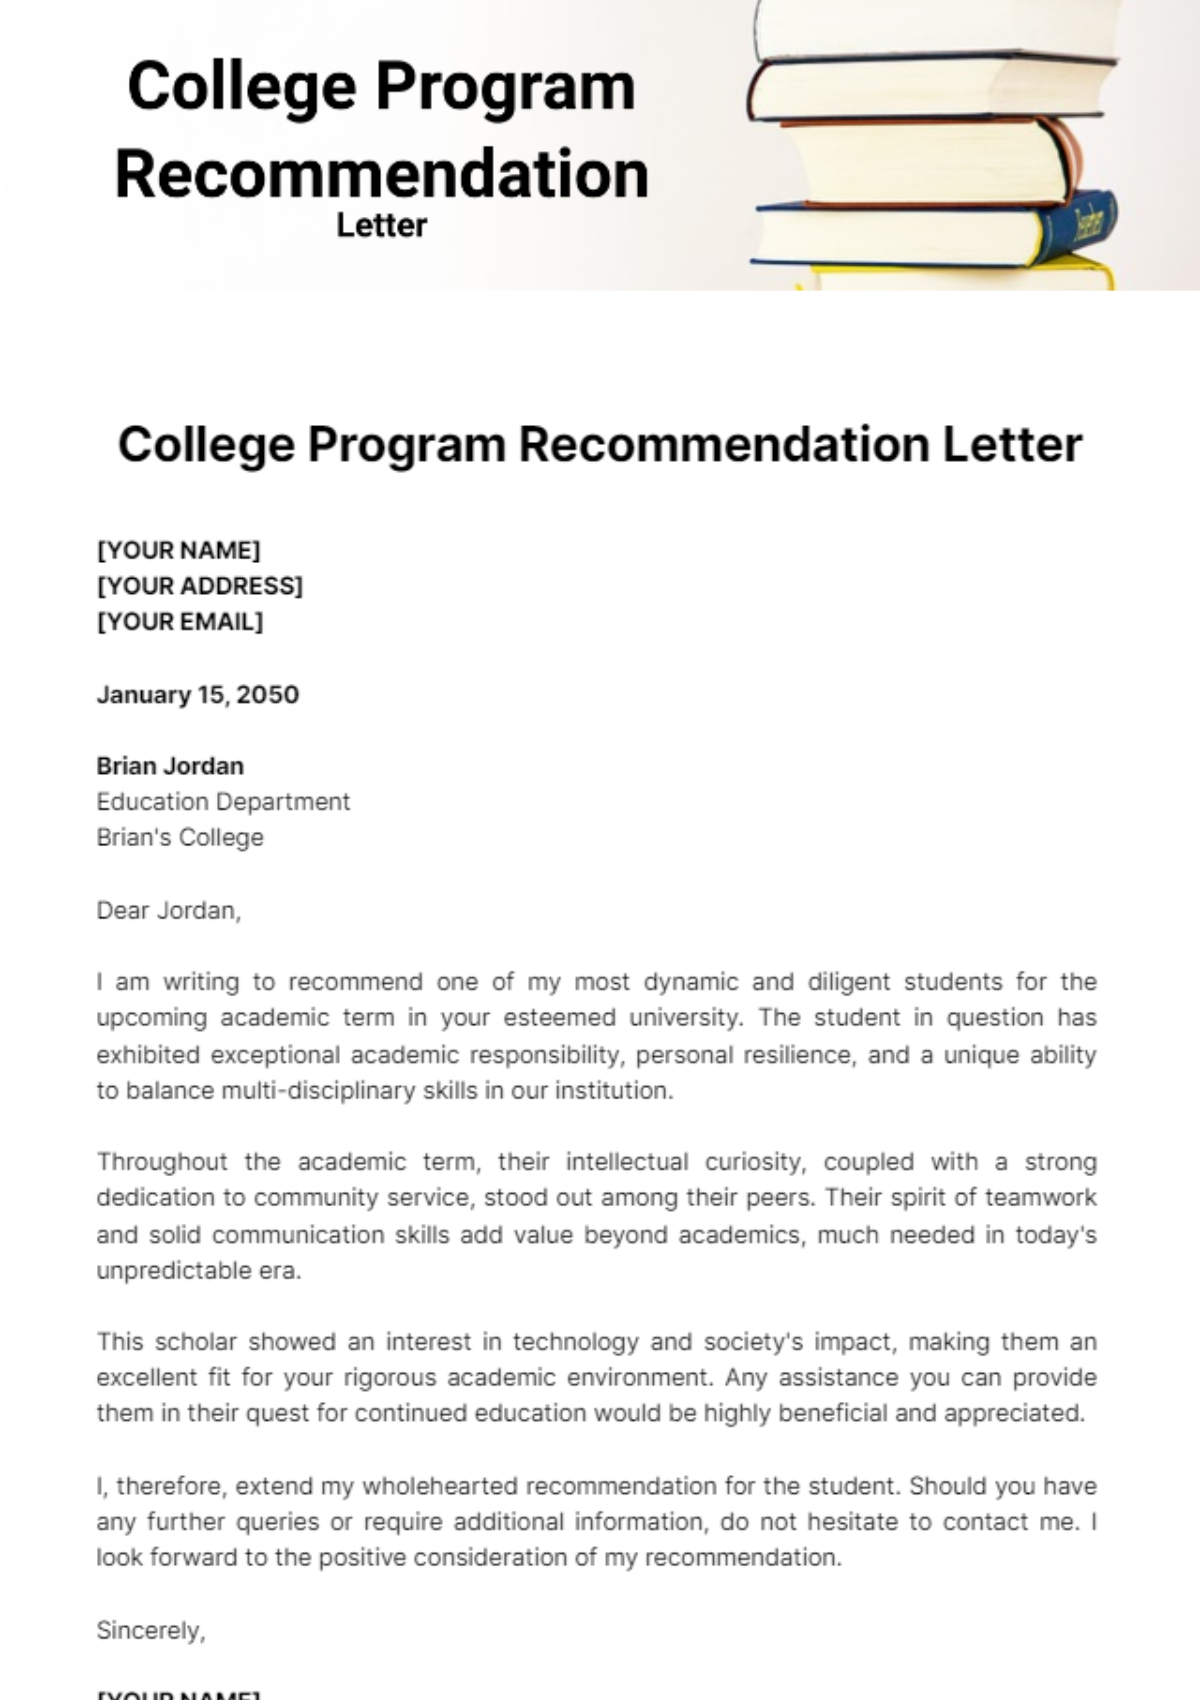 Free College Program Recommendation Letter Template